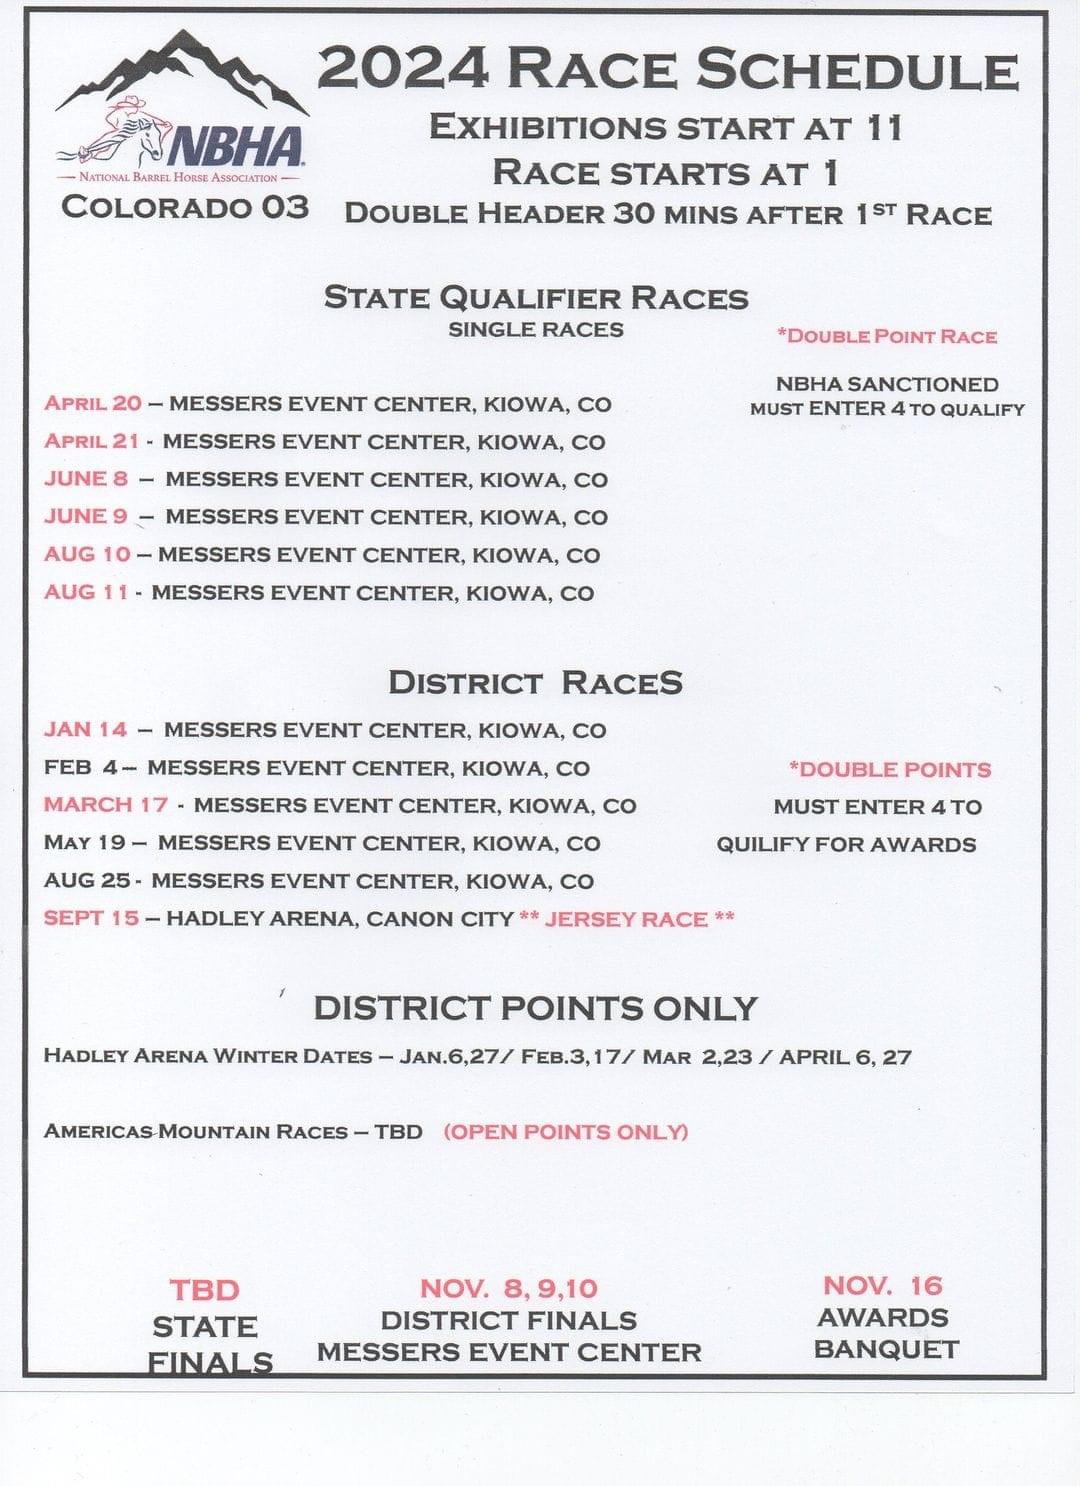 NBHA State Qualifier Races